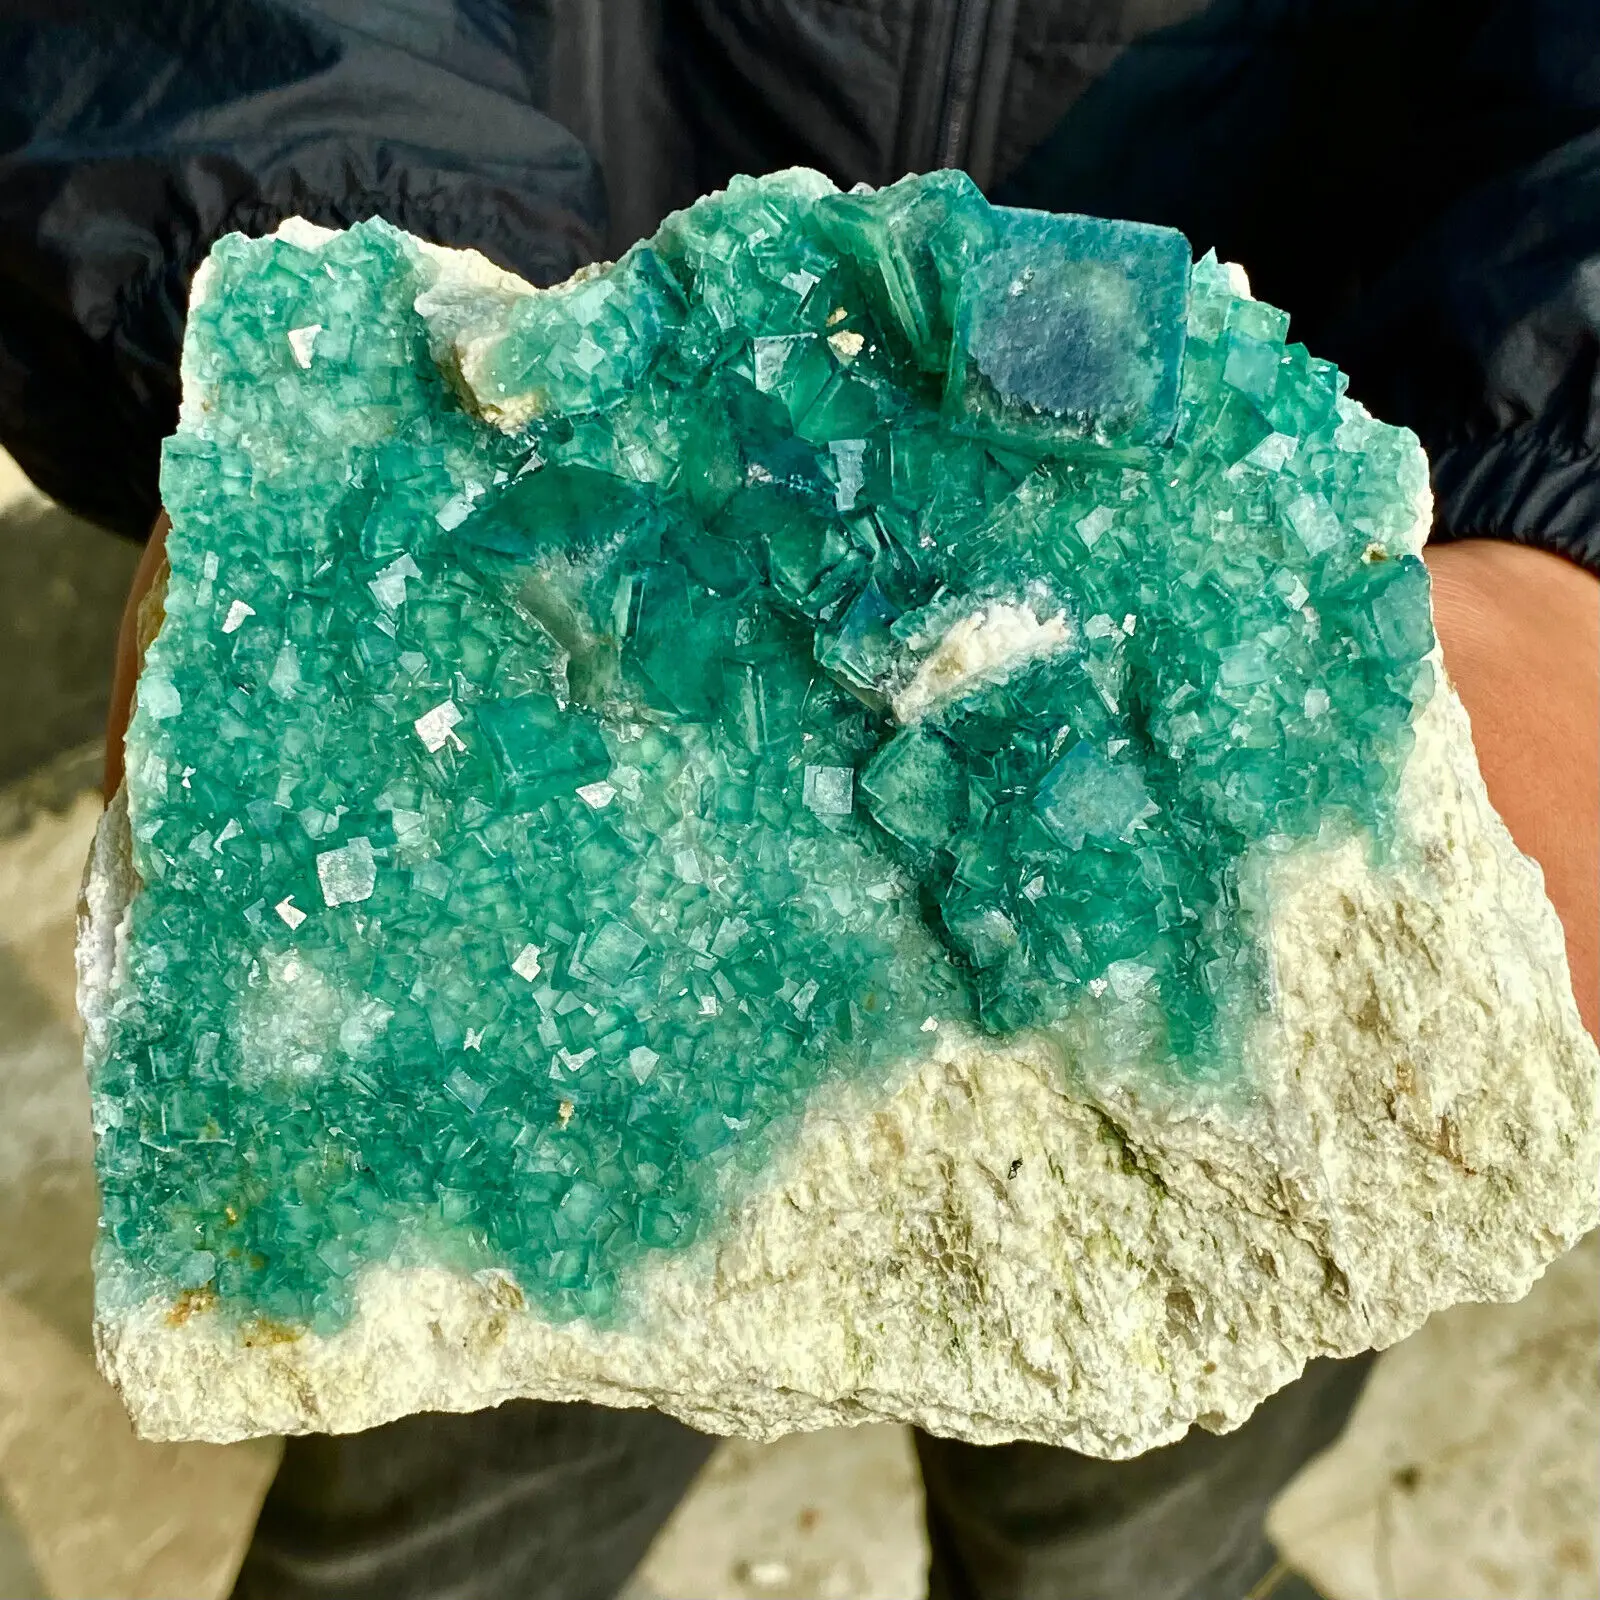 

Magical Natural Green Fluorite Ore Quartz Crystal Mineral Specimen Sample Therapy Home Office Degaussing Decorative Energy Gem